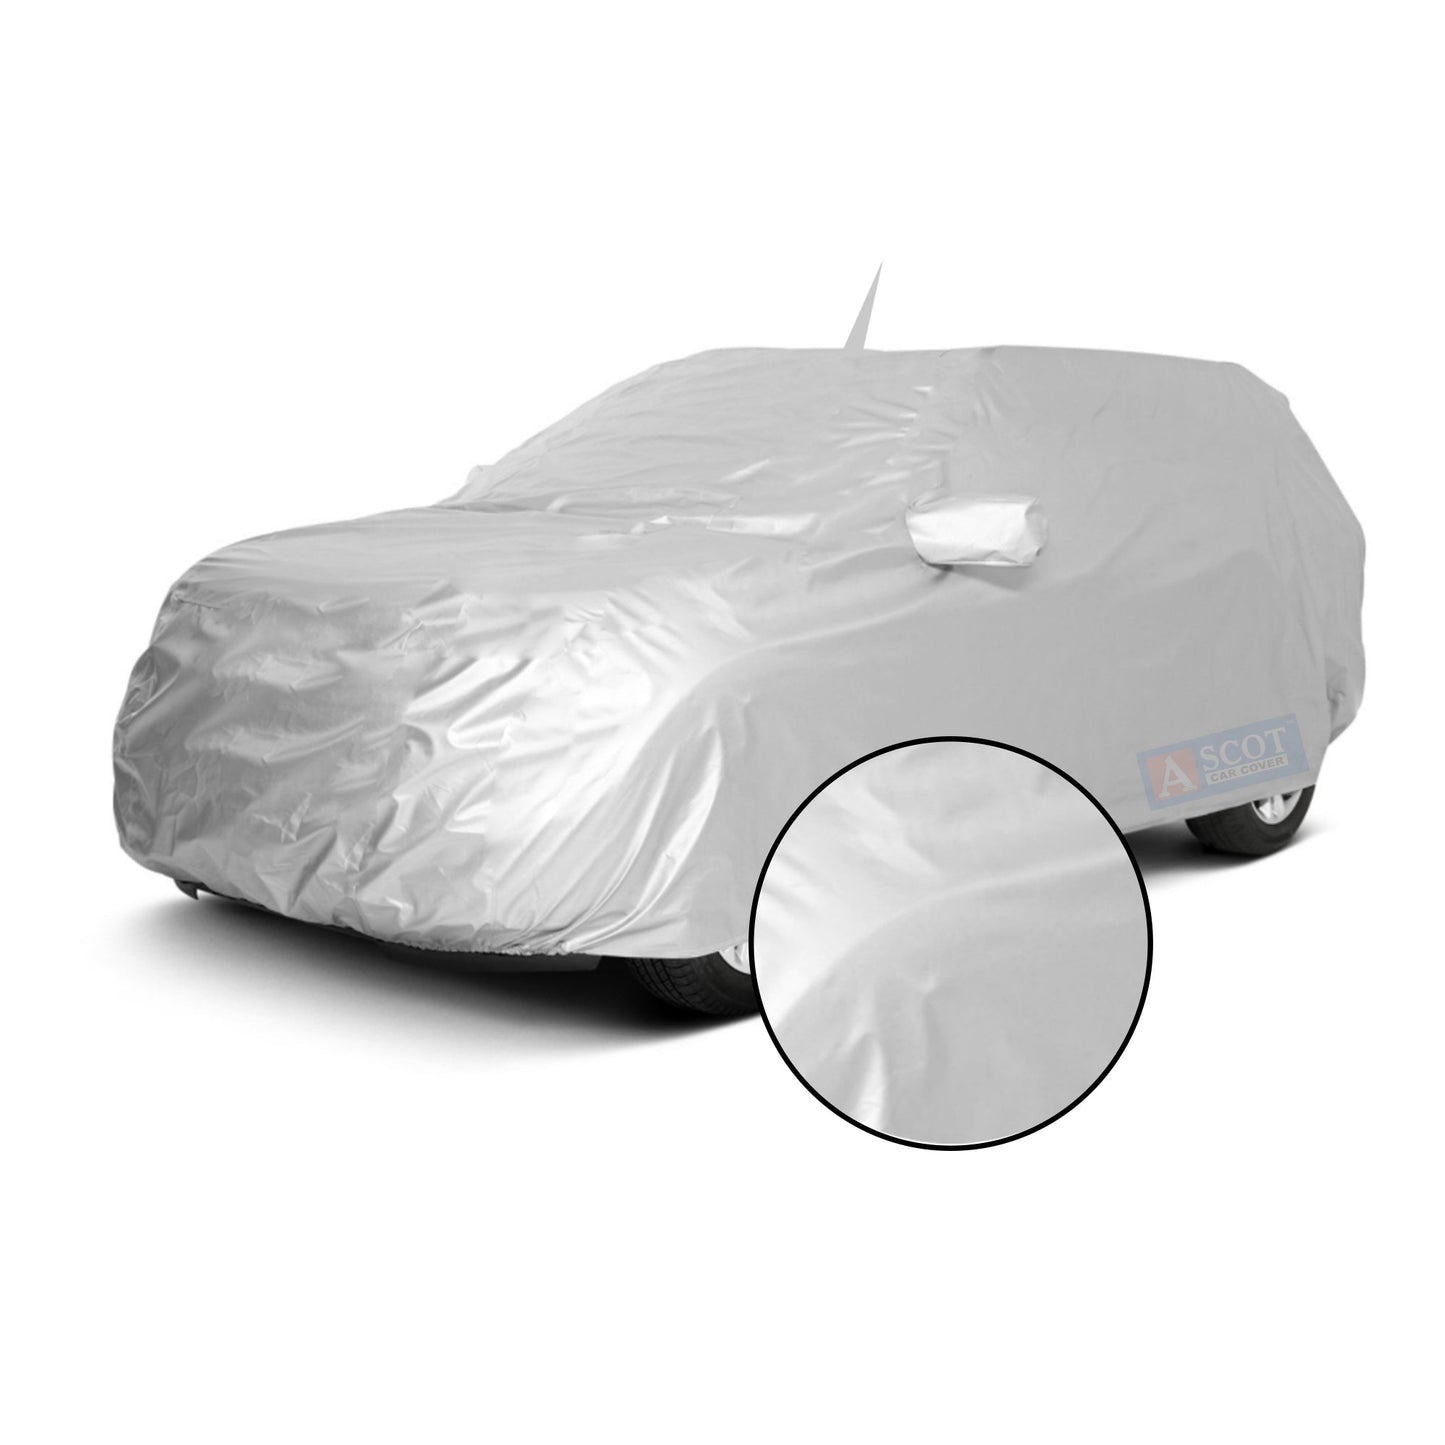 Ascot Audi A7 2010-2018 Model Car Body Cover Dust Proof, Trippel Stitched